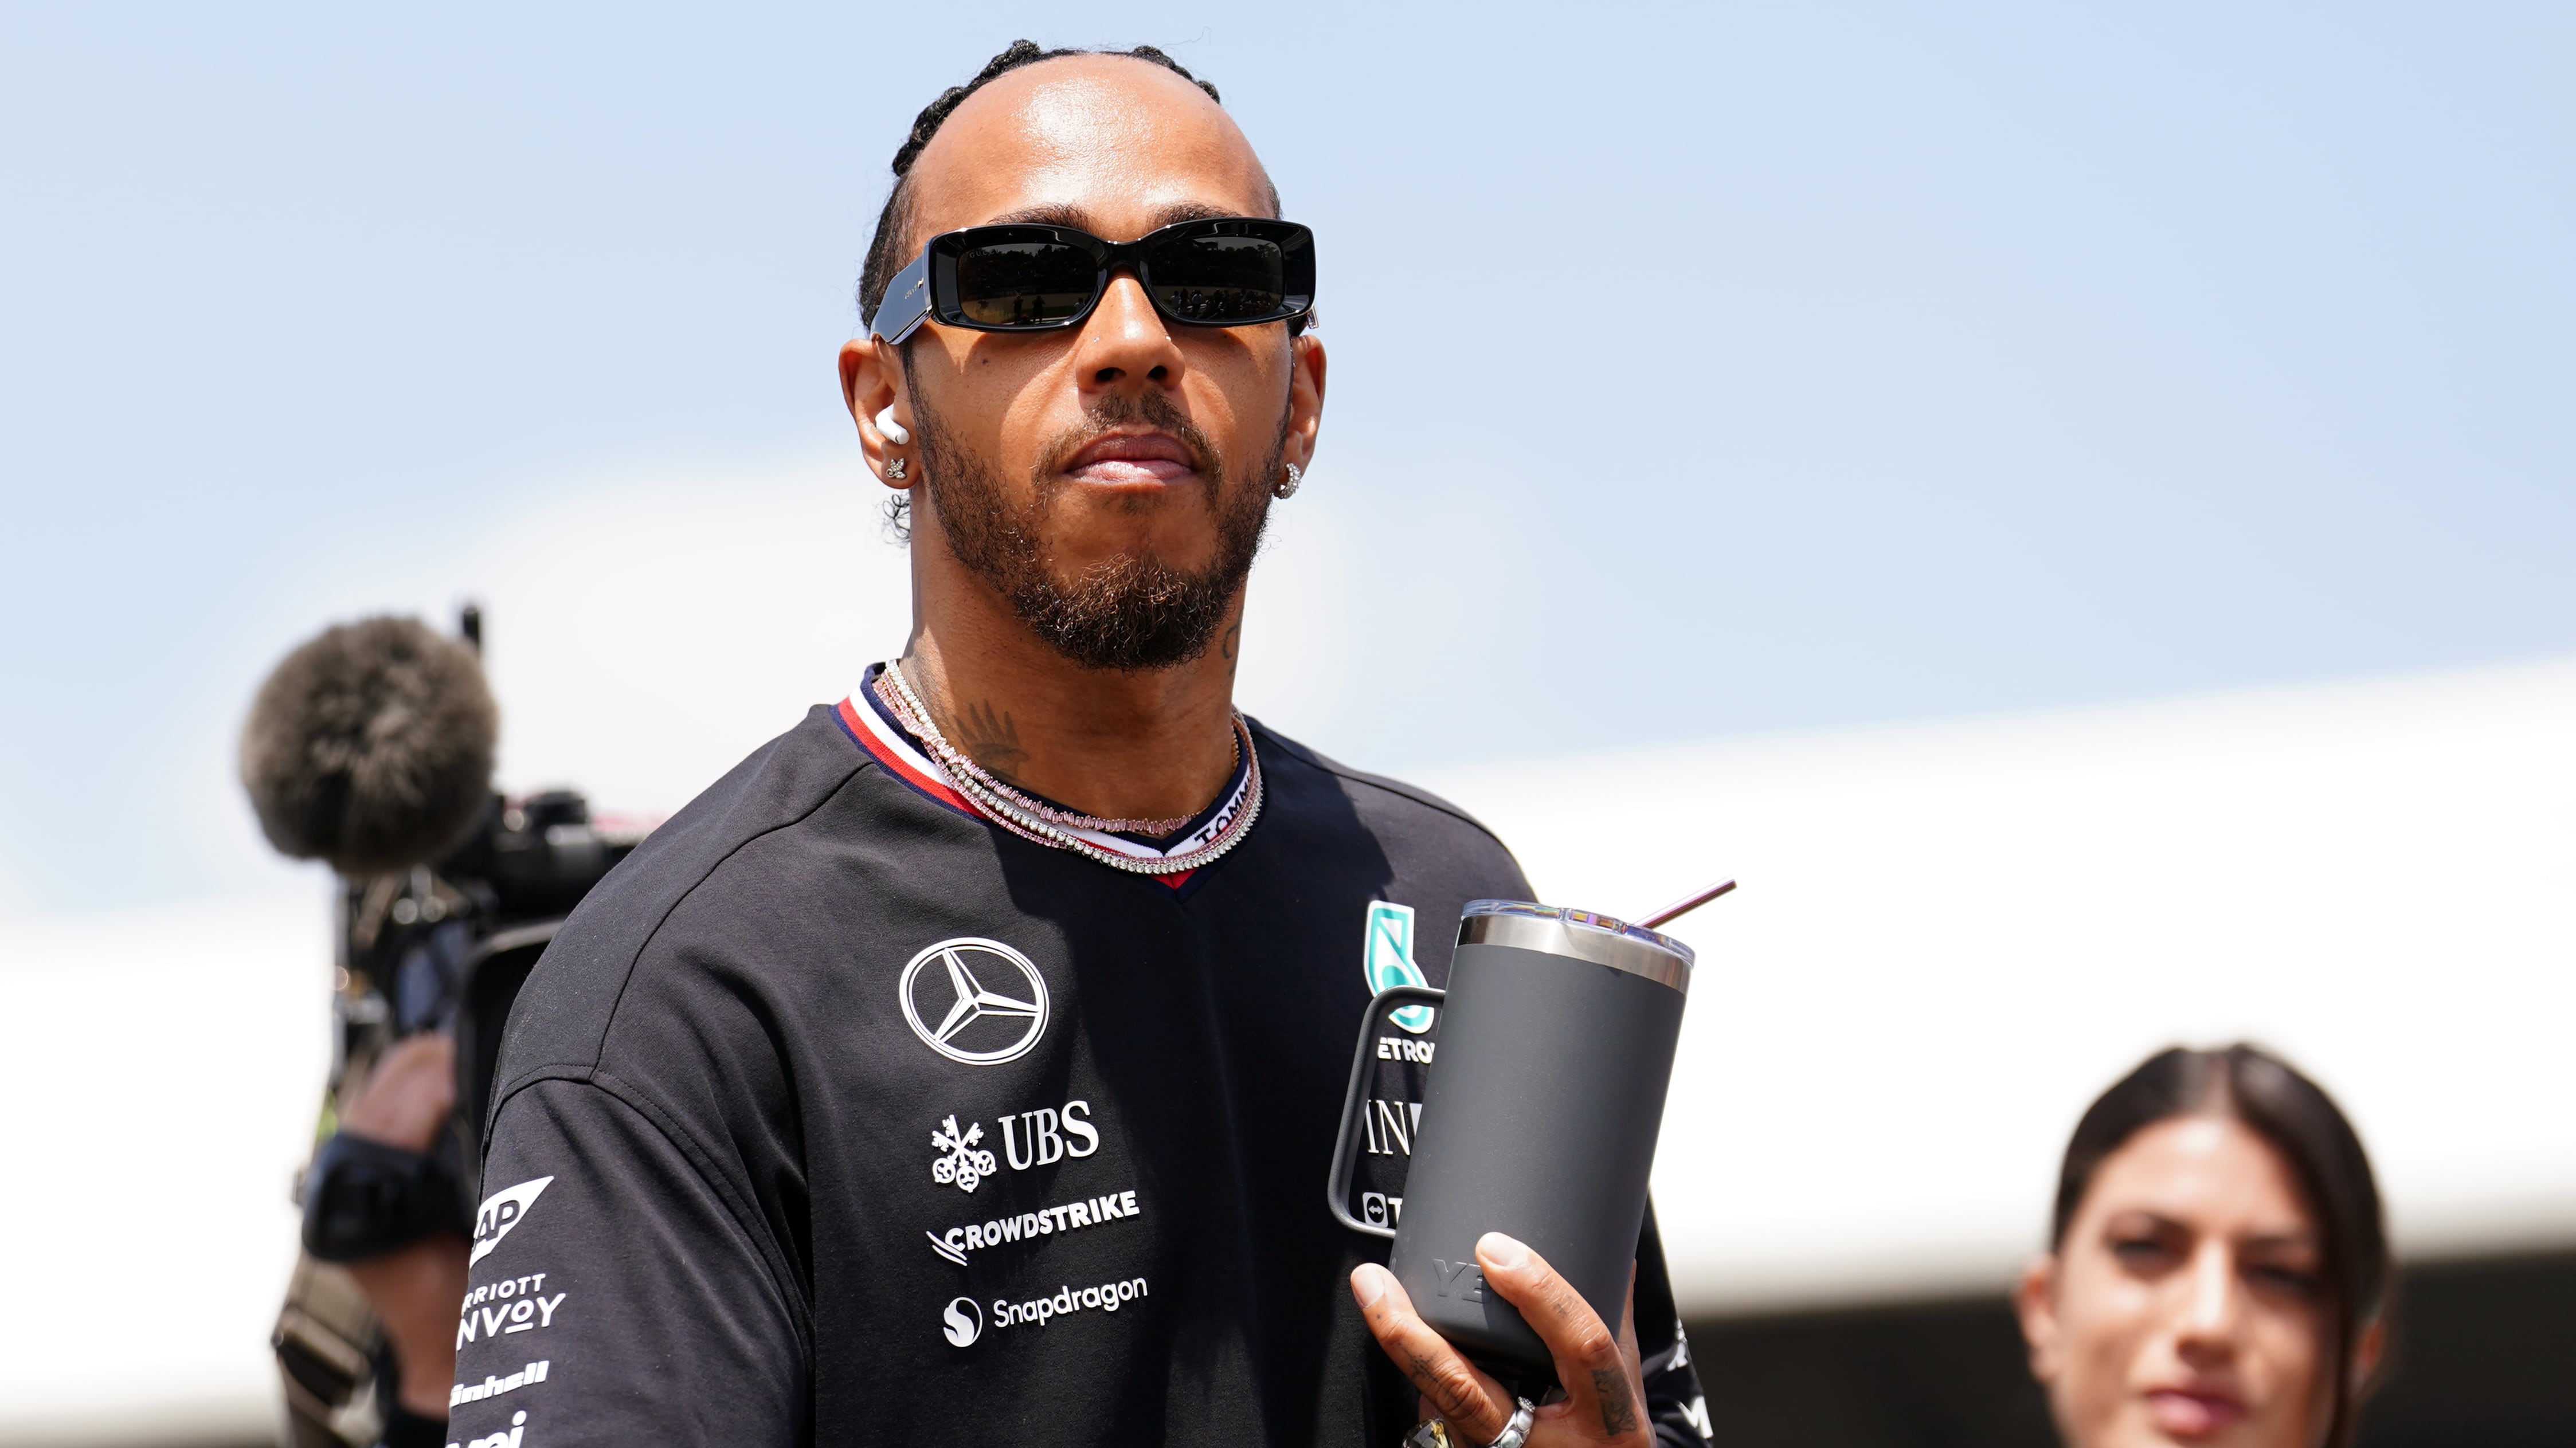 Lewis Hamilton called for “support not negativity” in response to claims of sabotage at Mercedes